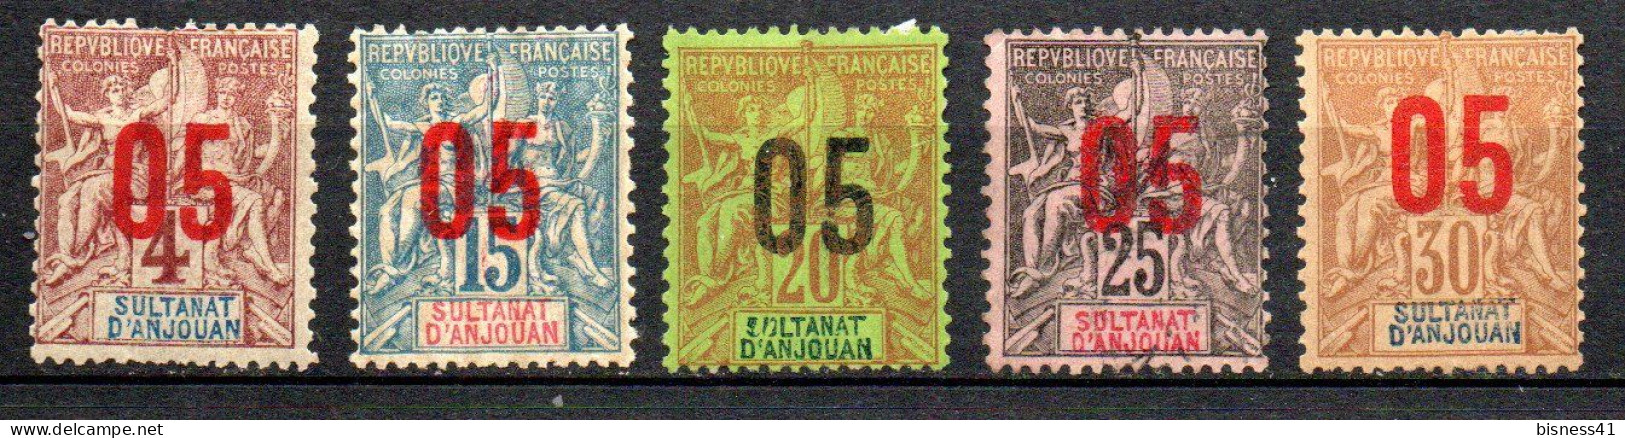 Col41  Colonie Anjouan N° 21 à 25 Neuf X MH Ou (X)  Cote 13,00€ - Used Stamps